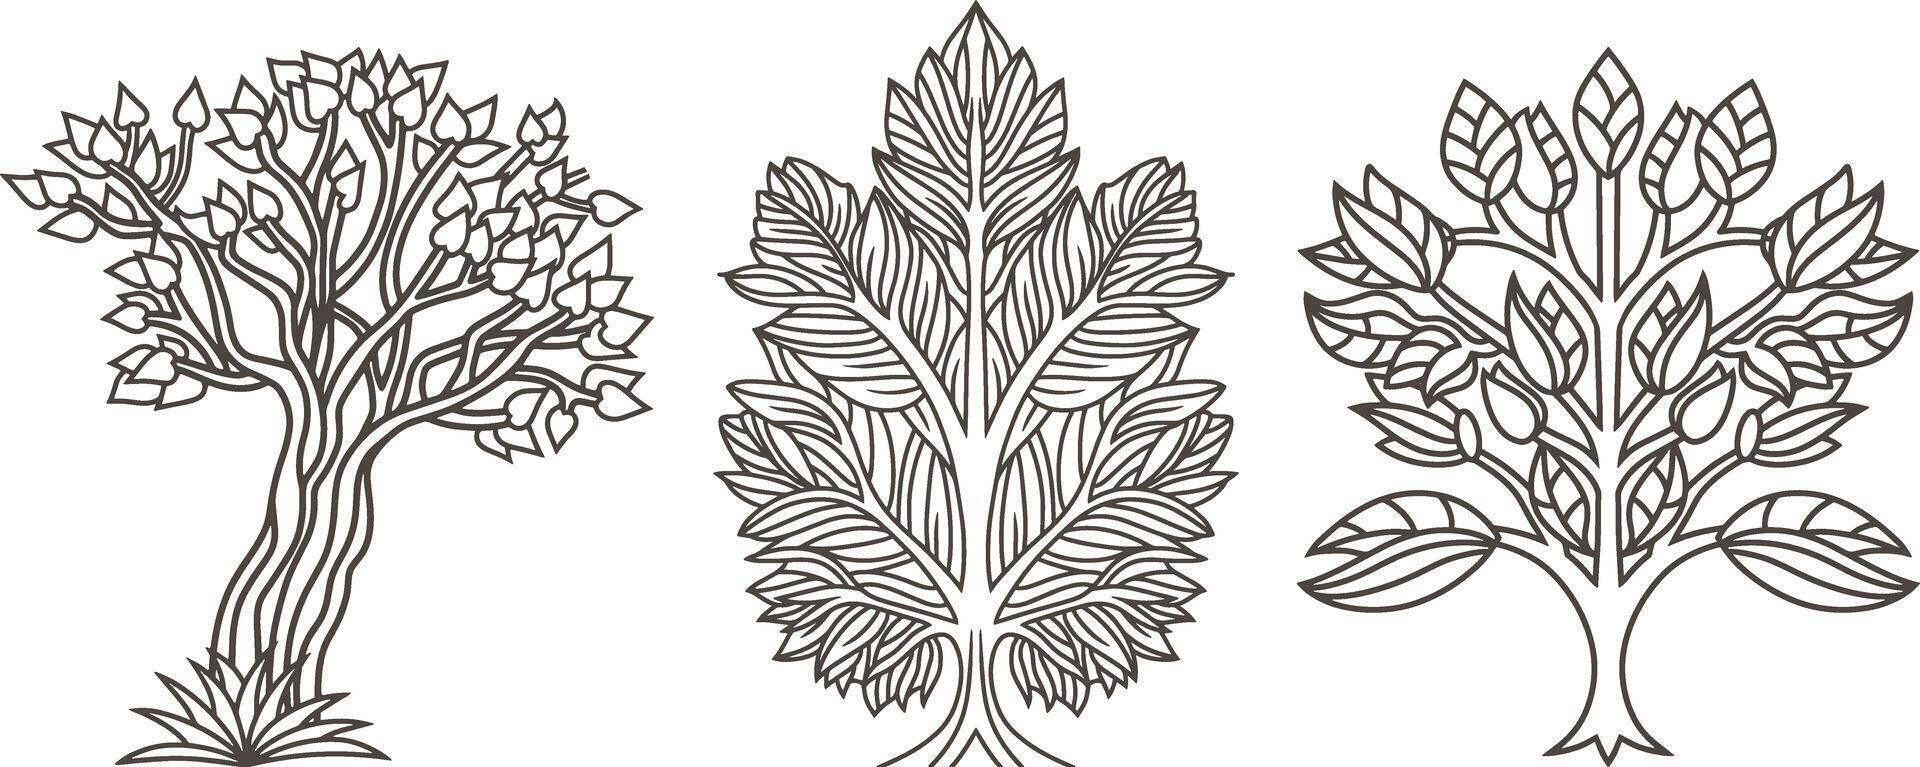 Doodle tree with leaf icon Sketch clipart Vector illustration